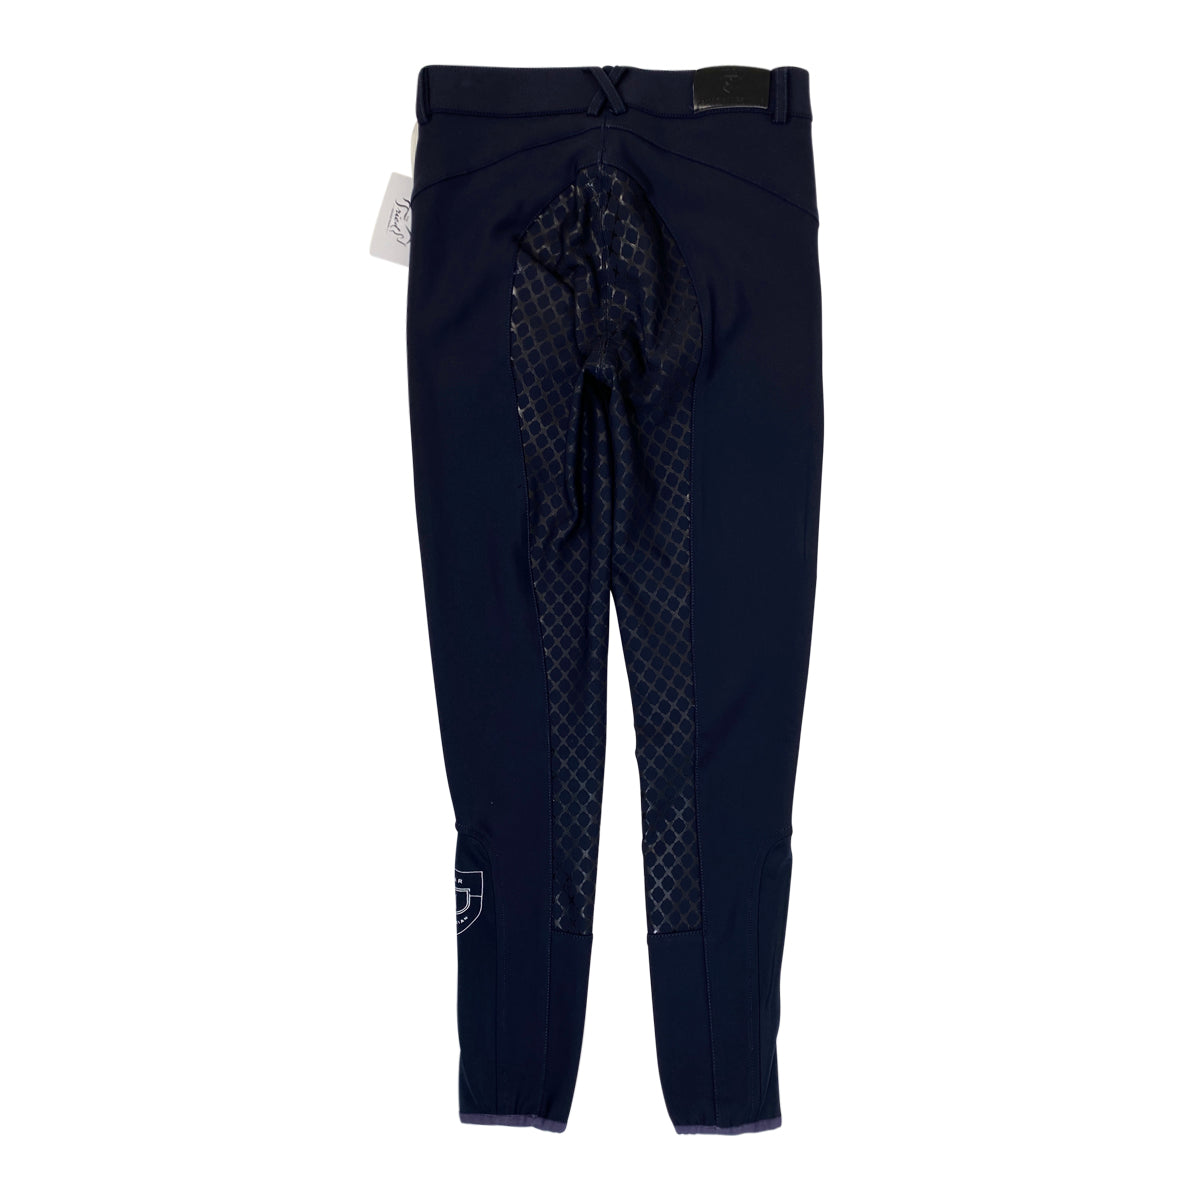 Asmar Equestrian Silicone Full Seat Breeches in Navy